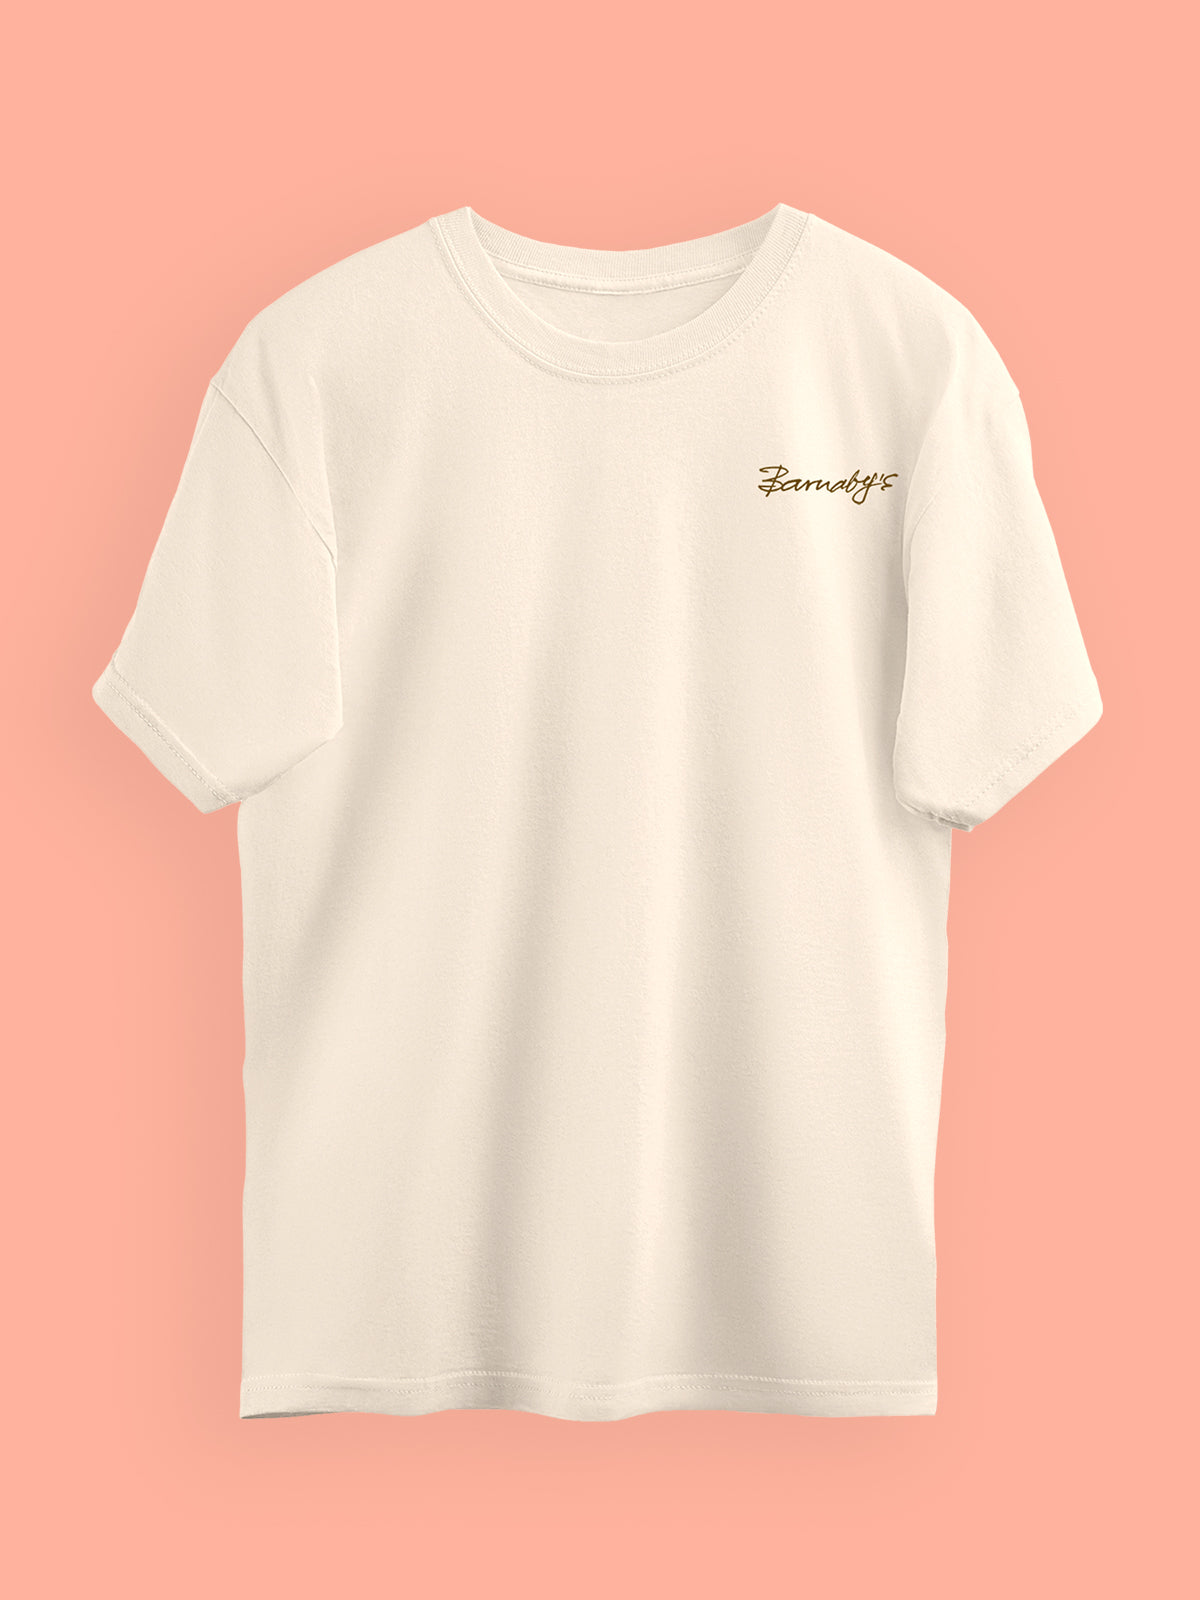 Barnaby's 'Save the Bees' Illustrated Cotton T-shirt (Cream)